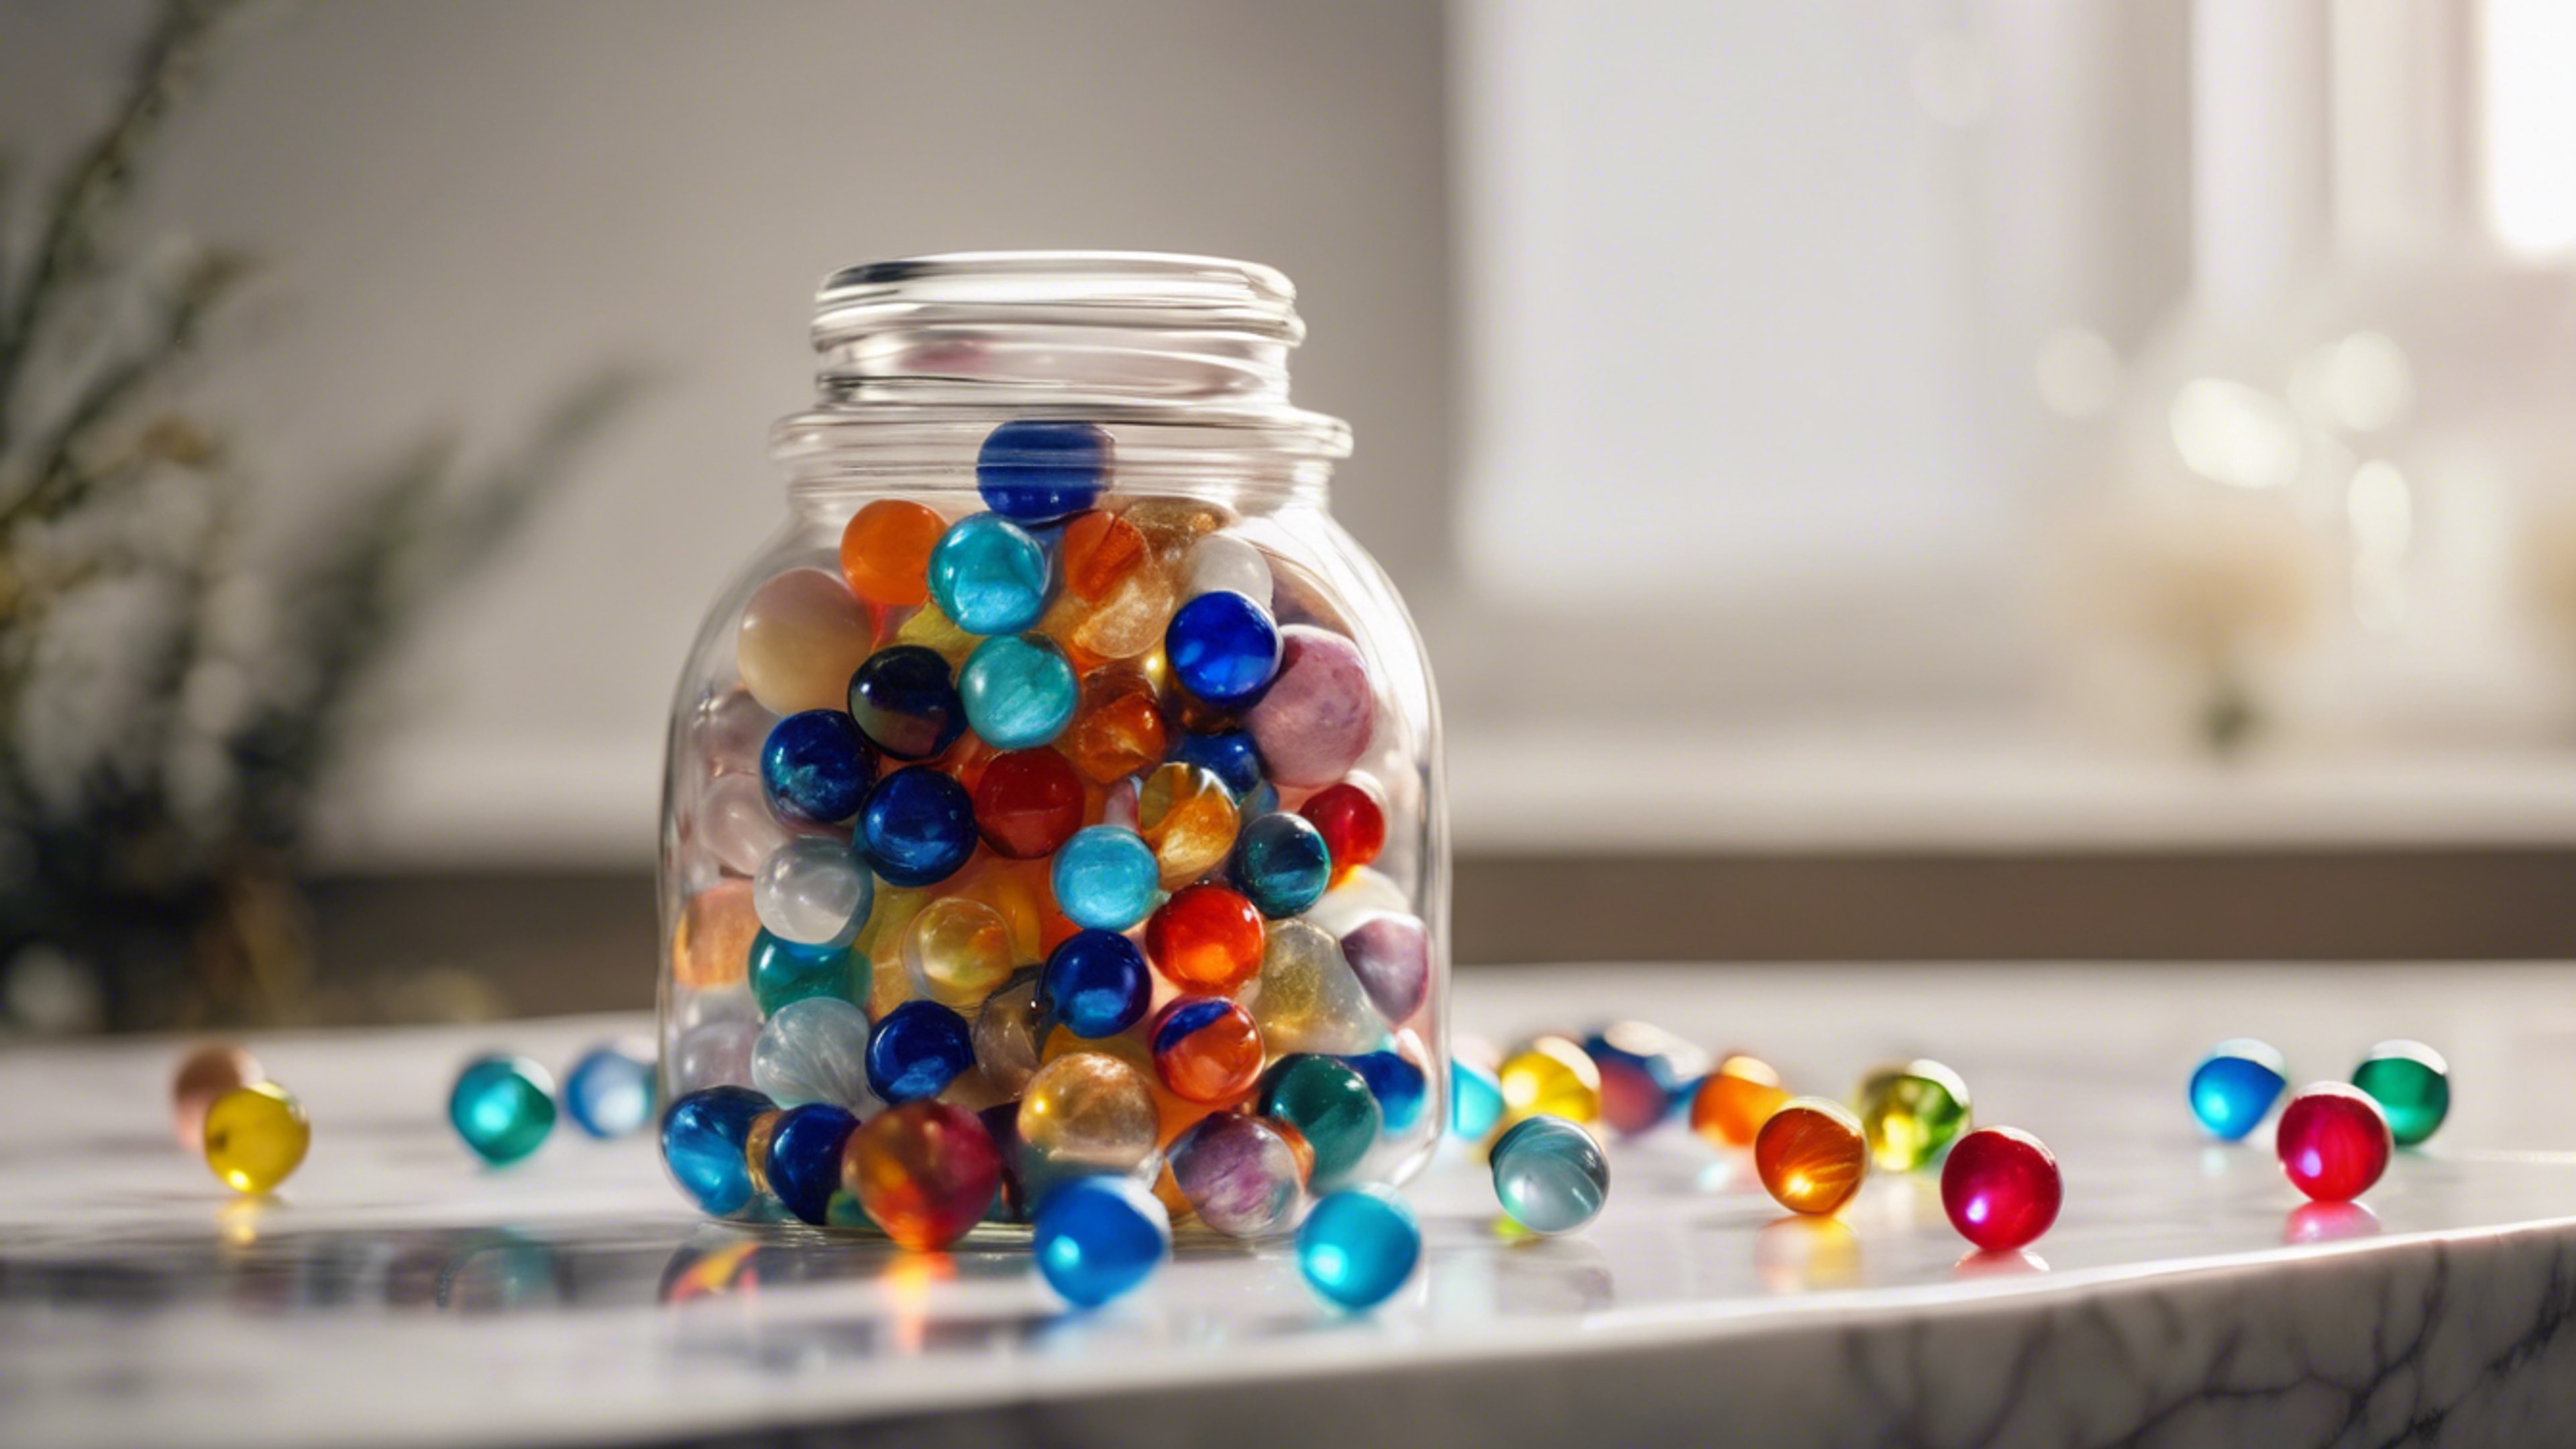 A glass jar full of colorful marbles with glinting lights around them, placed on a white marble surface. duvar kağıdı[9438bf9259b84d3ca042]